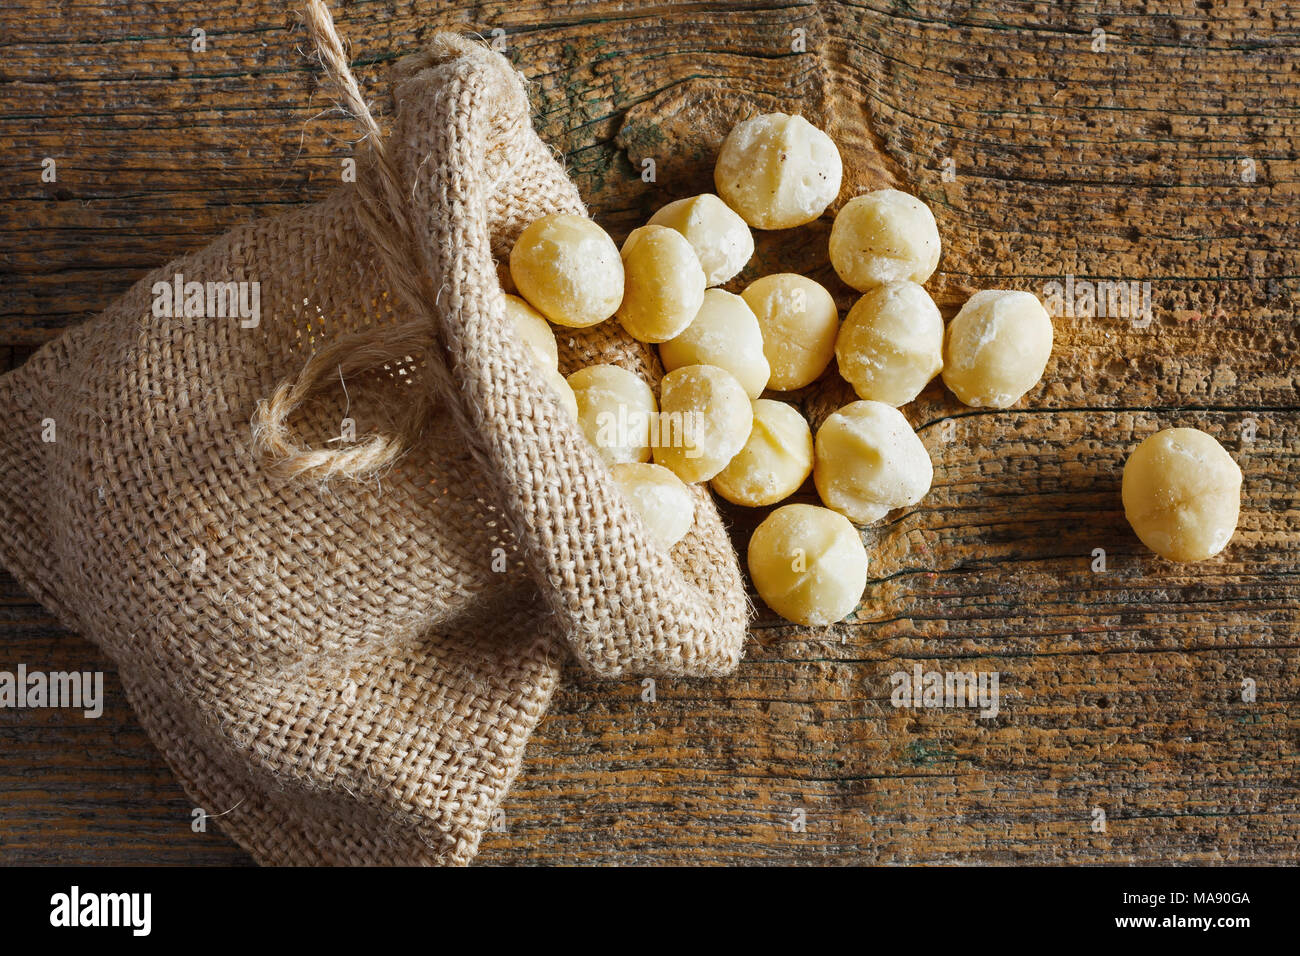 Macadamia nuts in small sack on wooden background Stock Photo